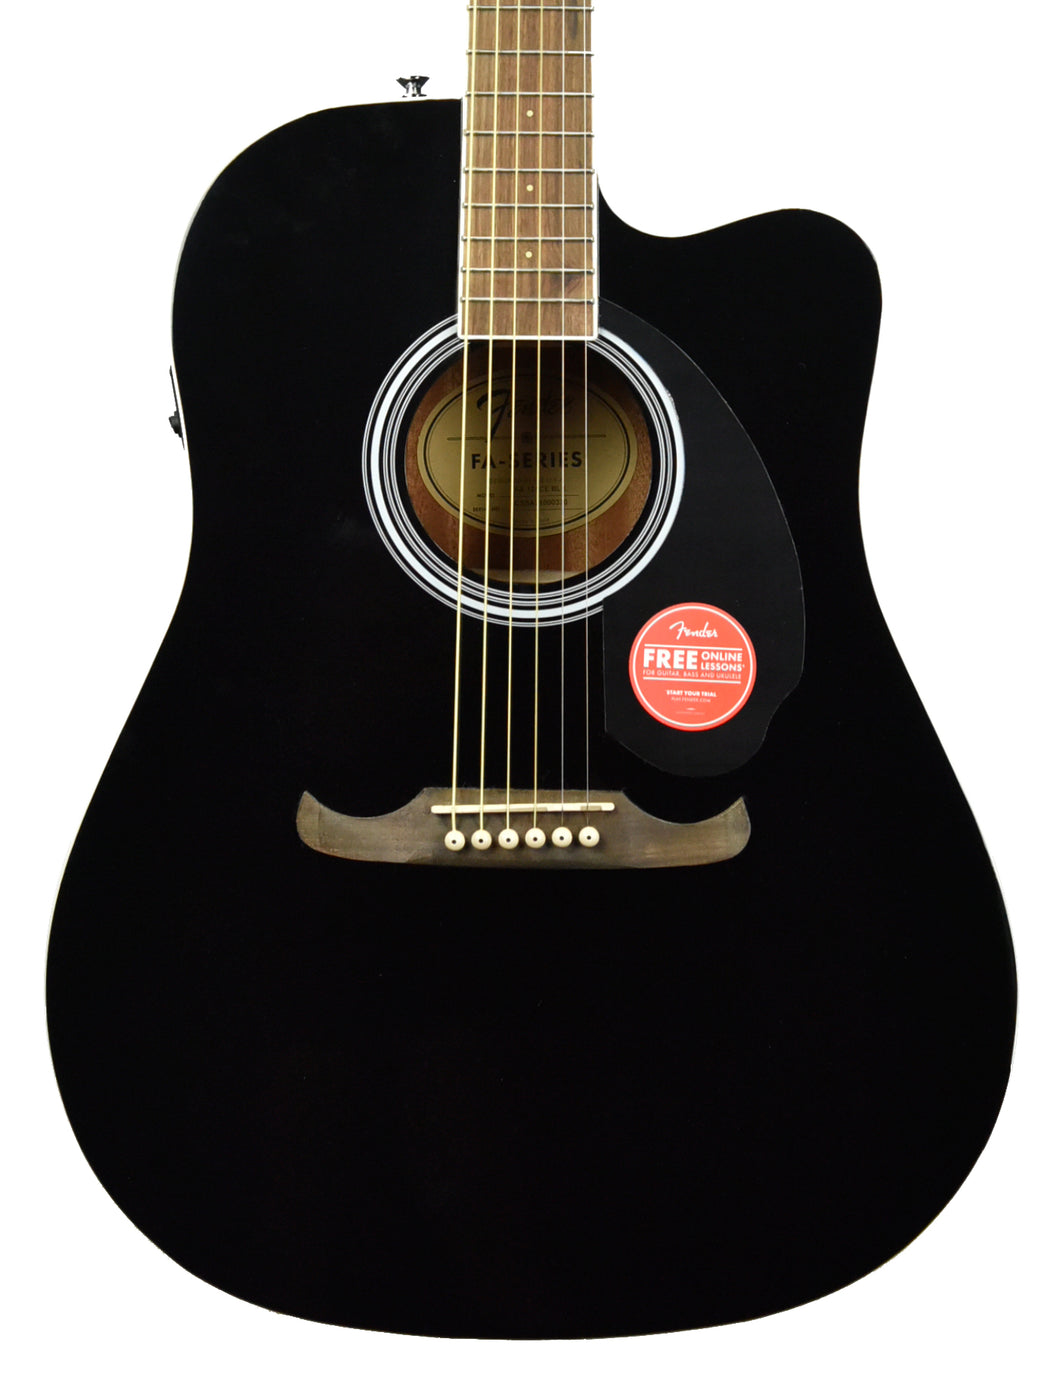 Fender FA-125CE Dreadnought Acoustic Electric Guitar in Black CSSA21000330 - The Music Gallery